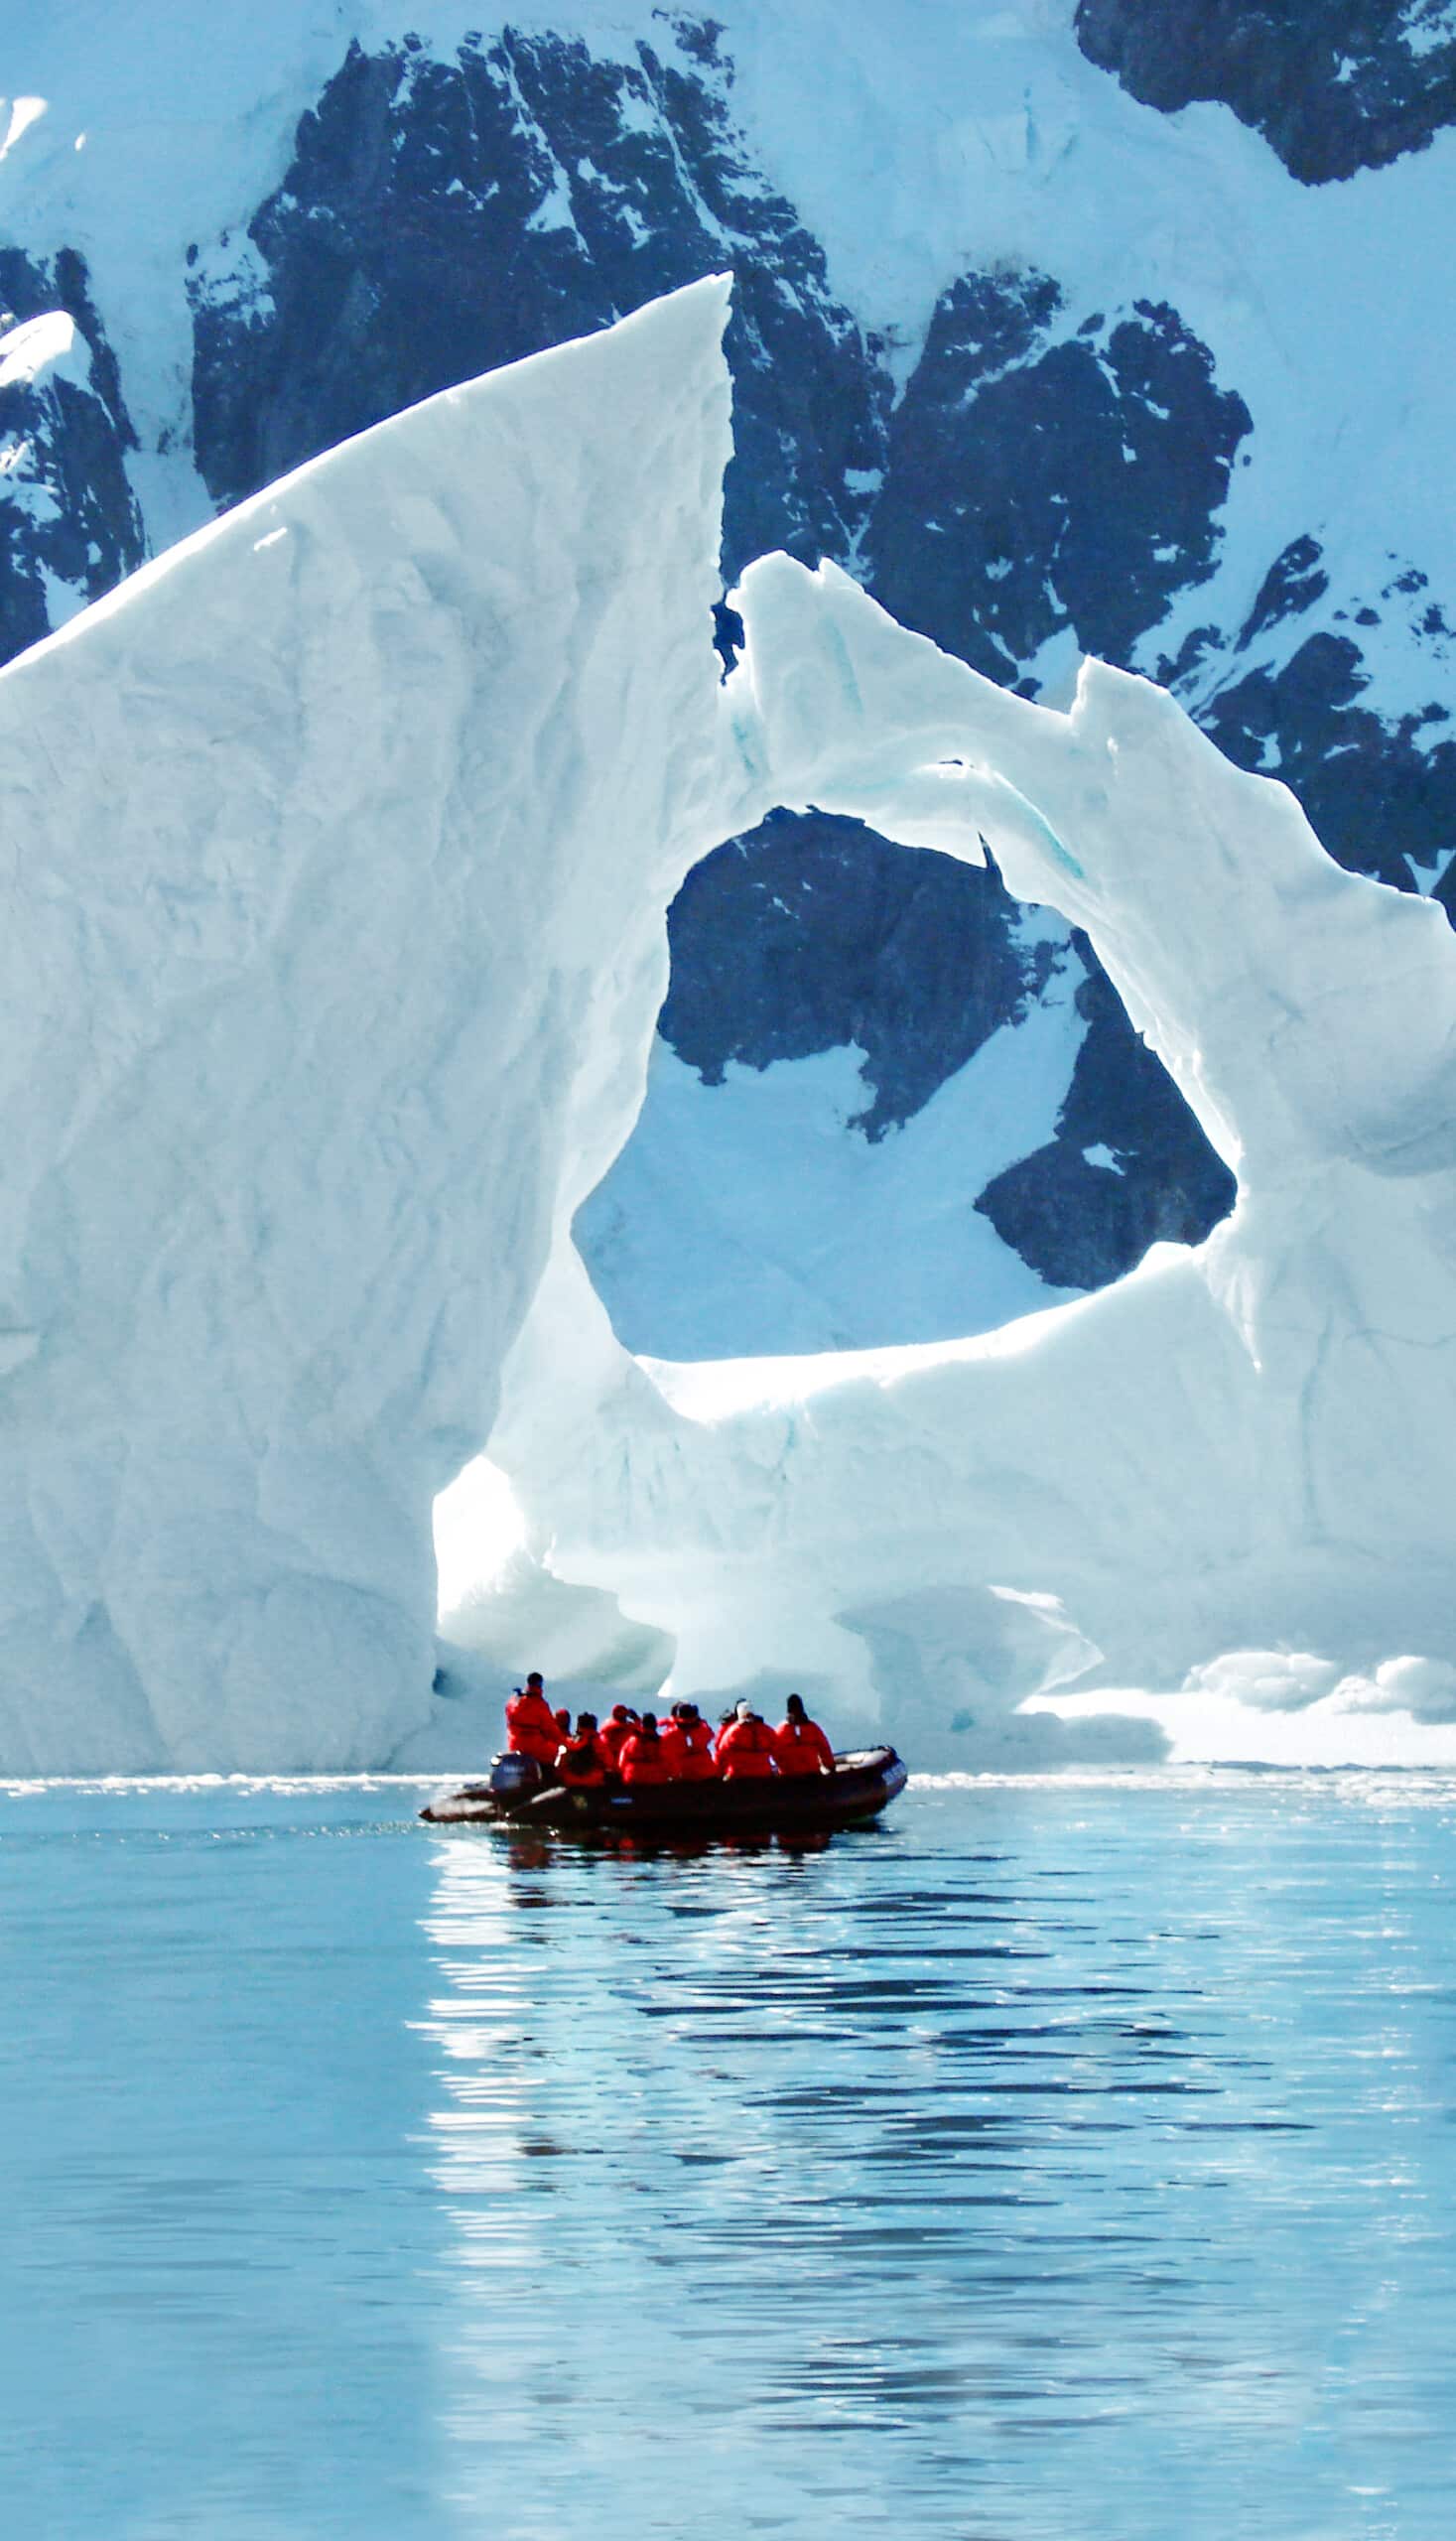 Zodiac with tourists under an iceberg in Antarctica